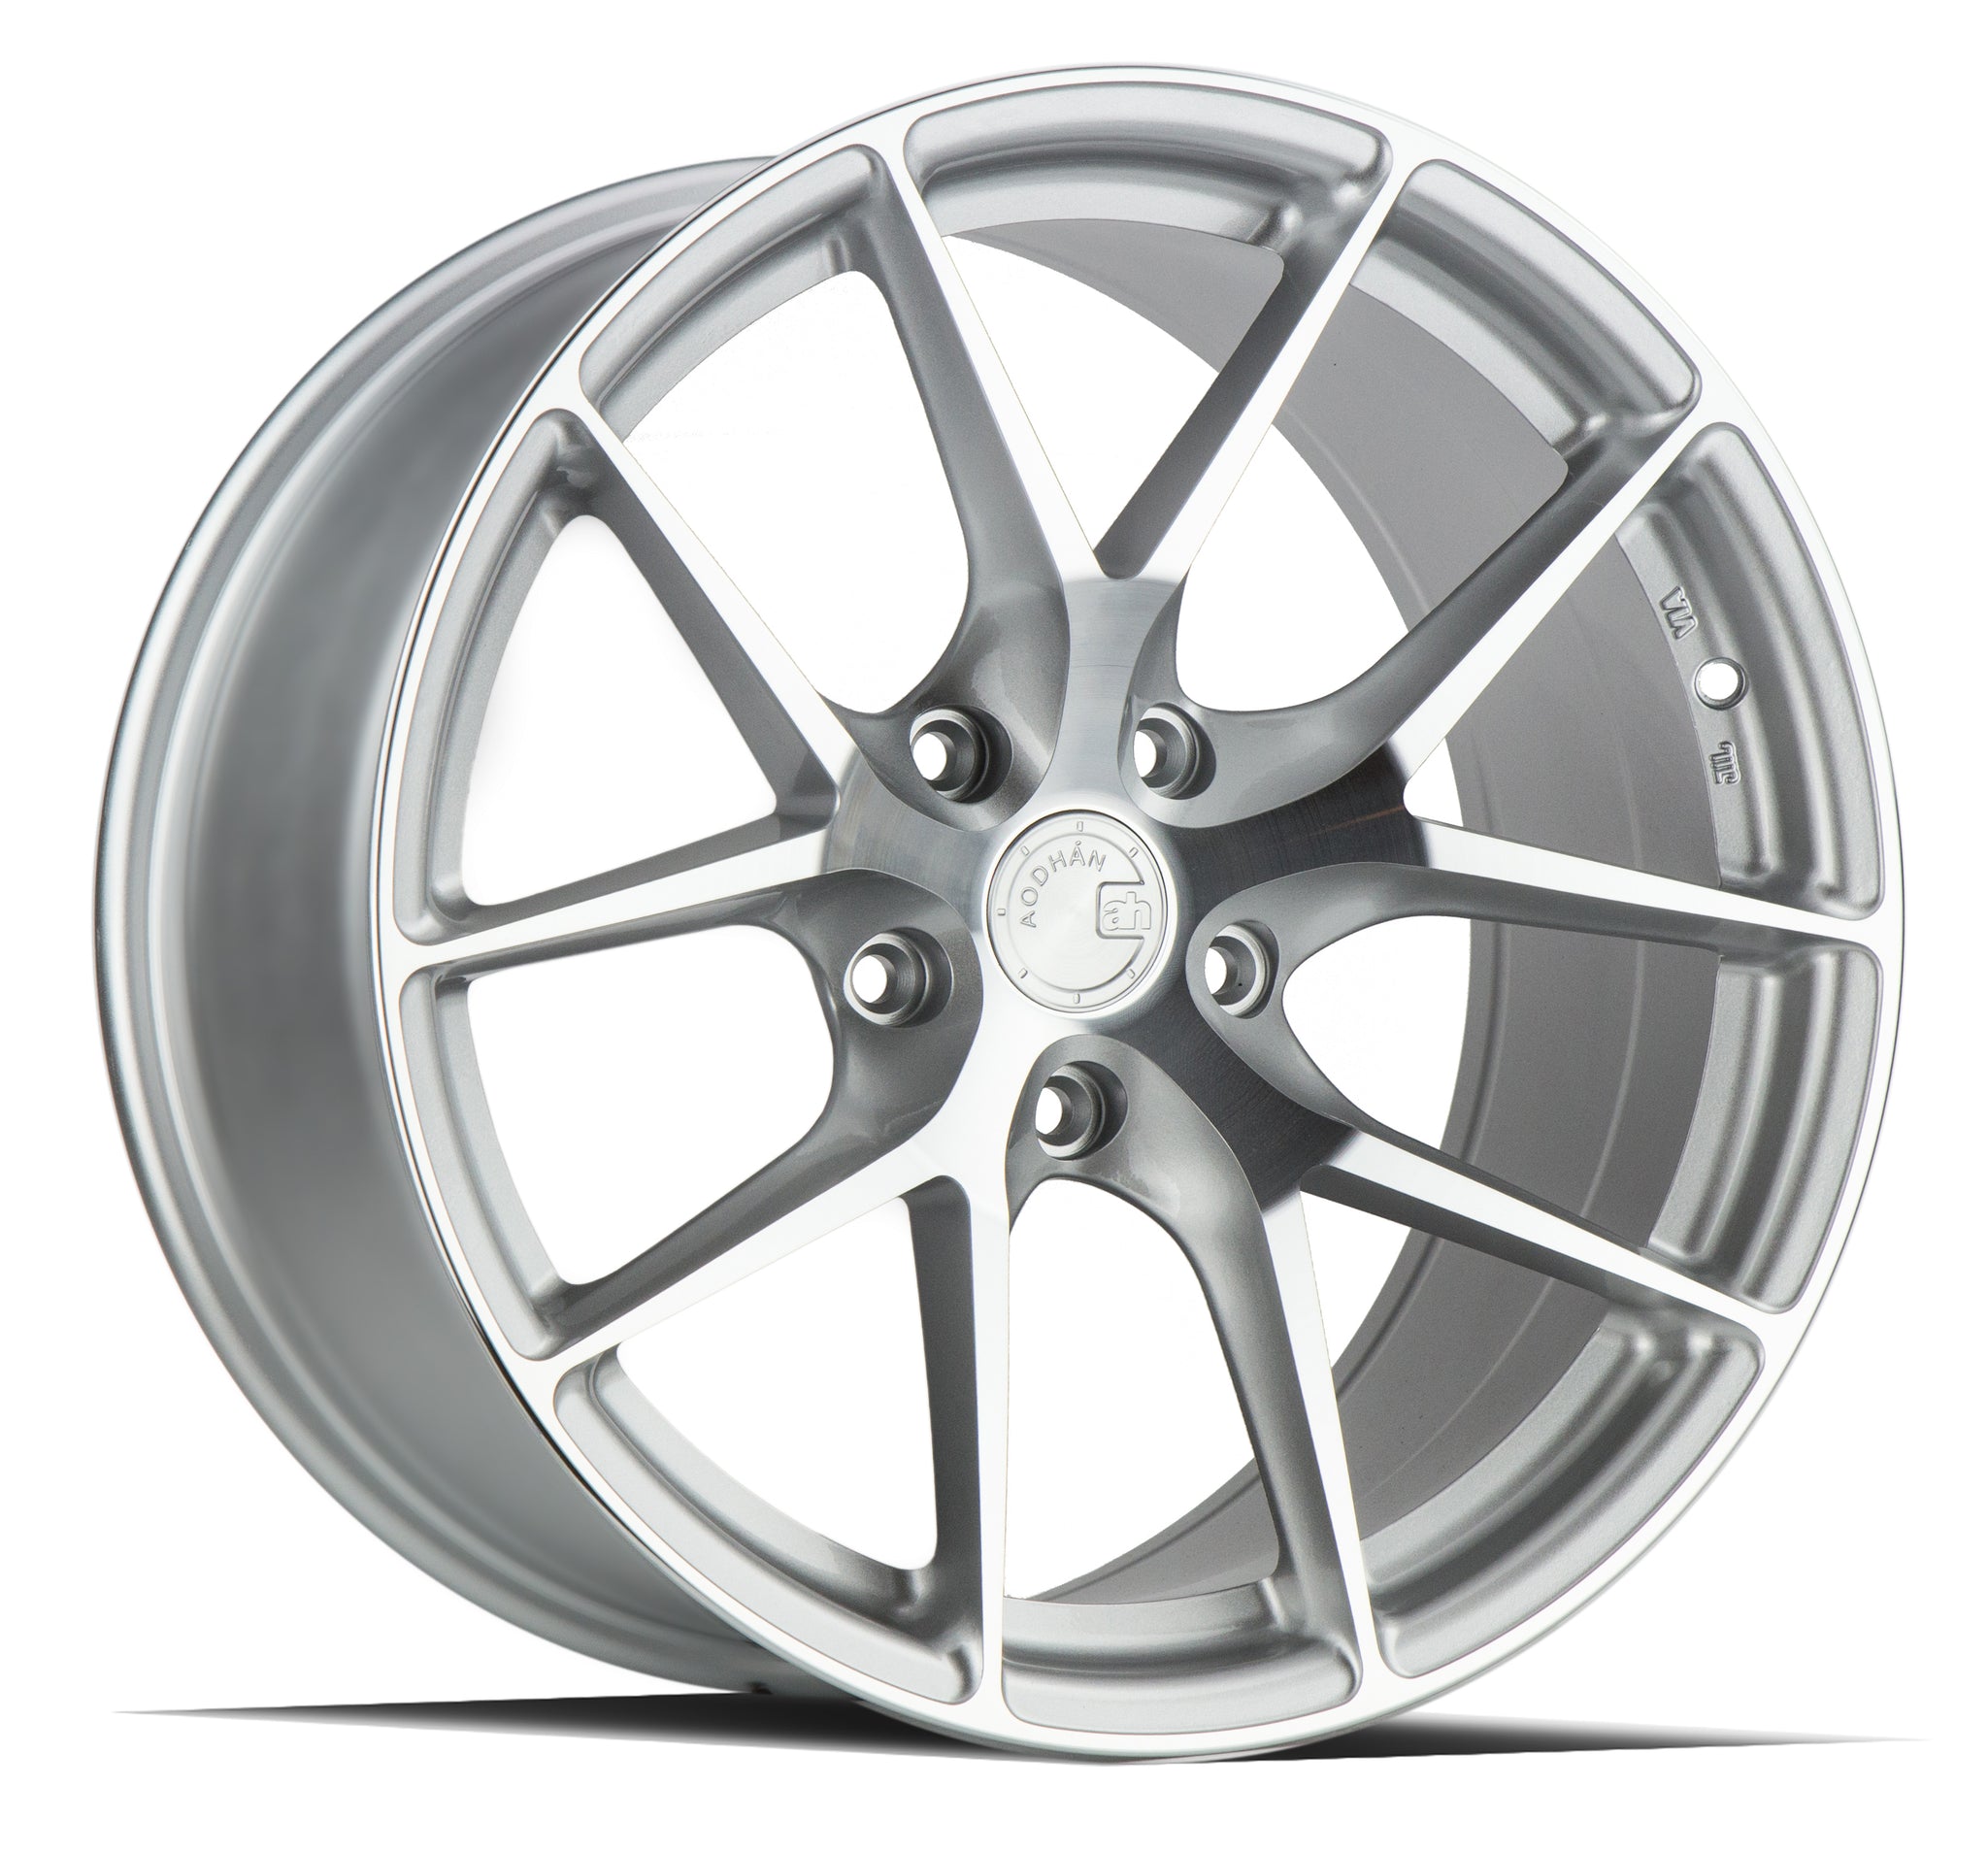 AODHAN AFF7 SILVER WITH MACHINED FACE WHEELS | 19X9.5 | 5X120 | OFFSET: 35MM | CB: 72.6MM